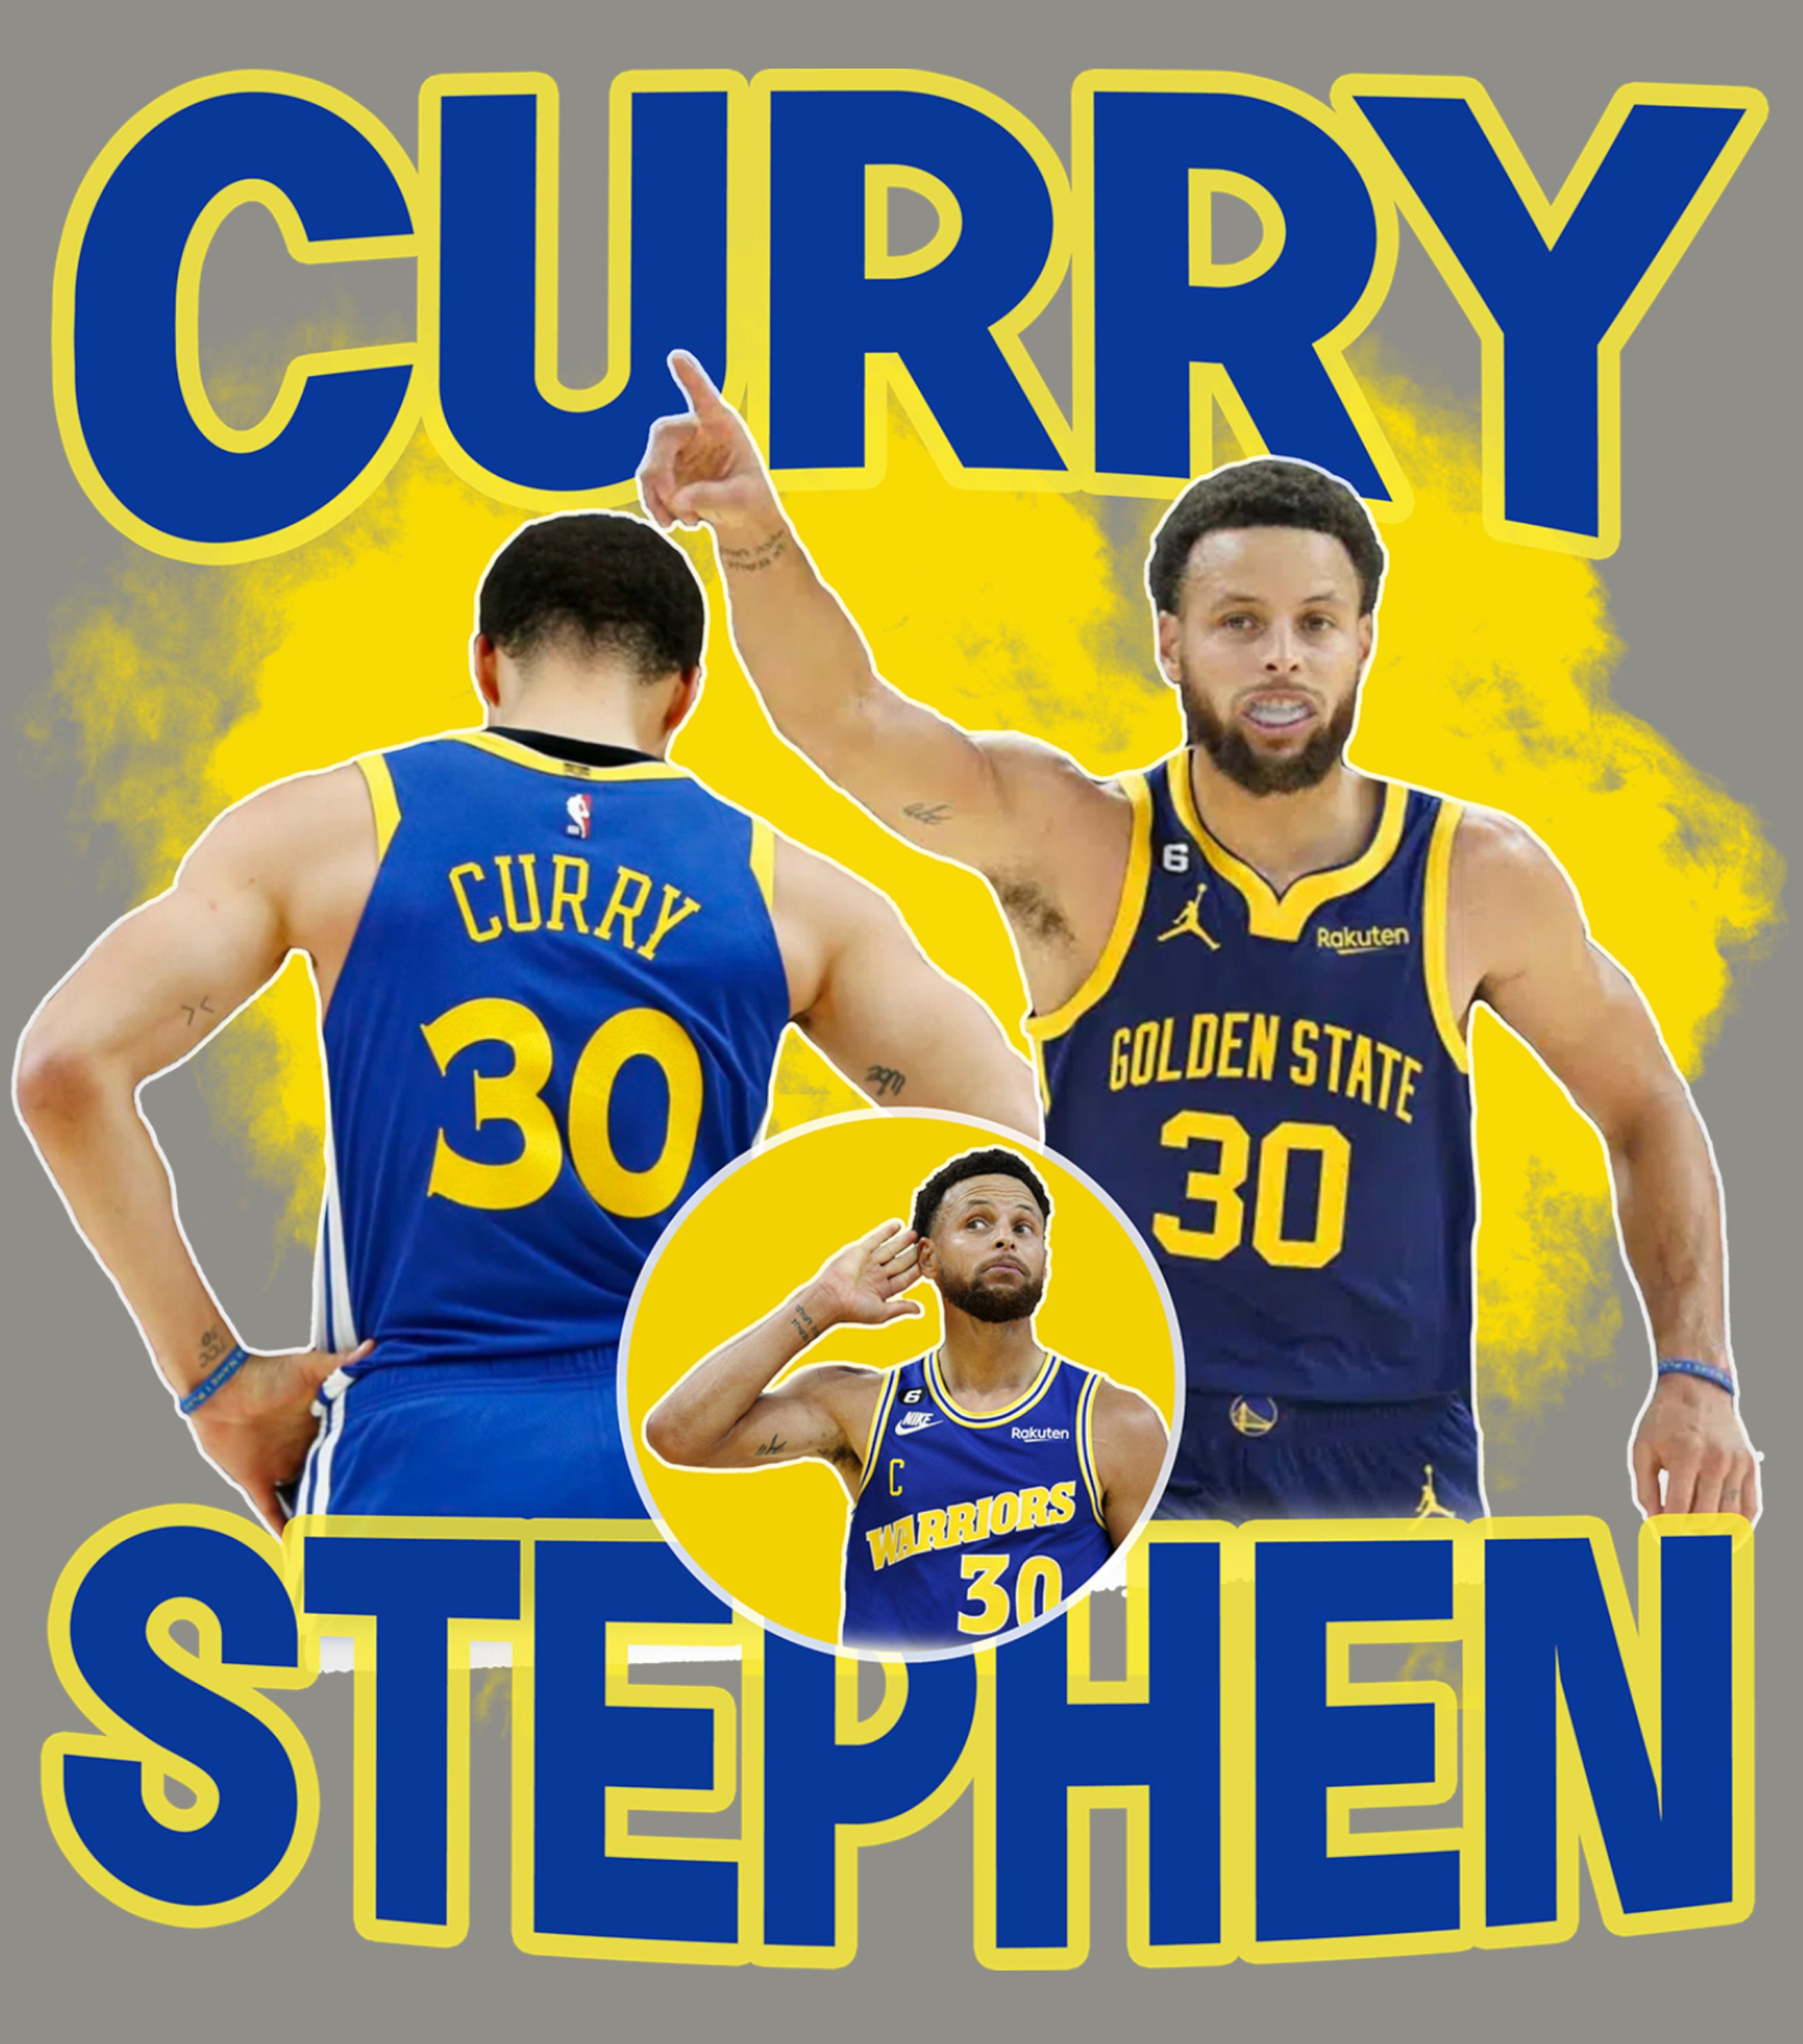 City Edition jersey Steph Curry customs : r/funkopop